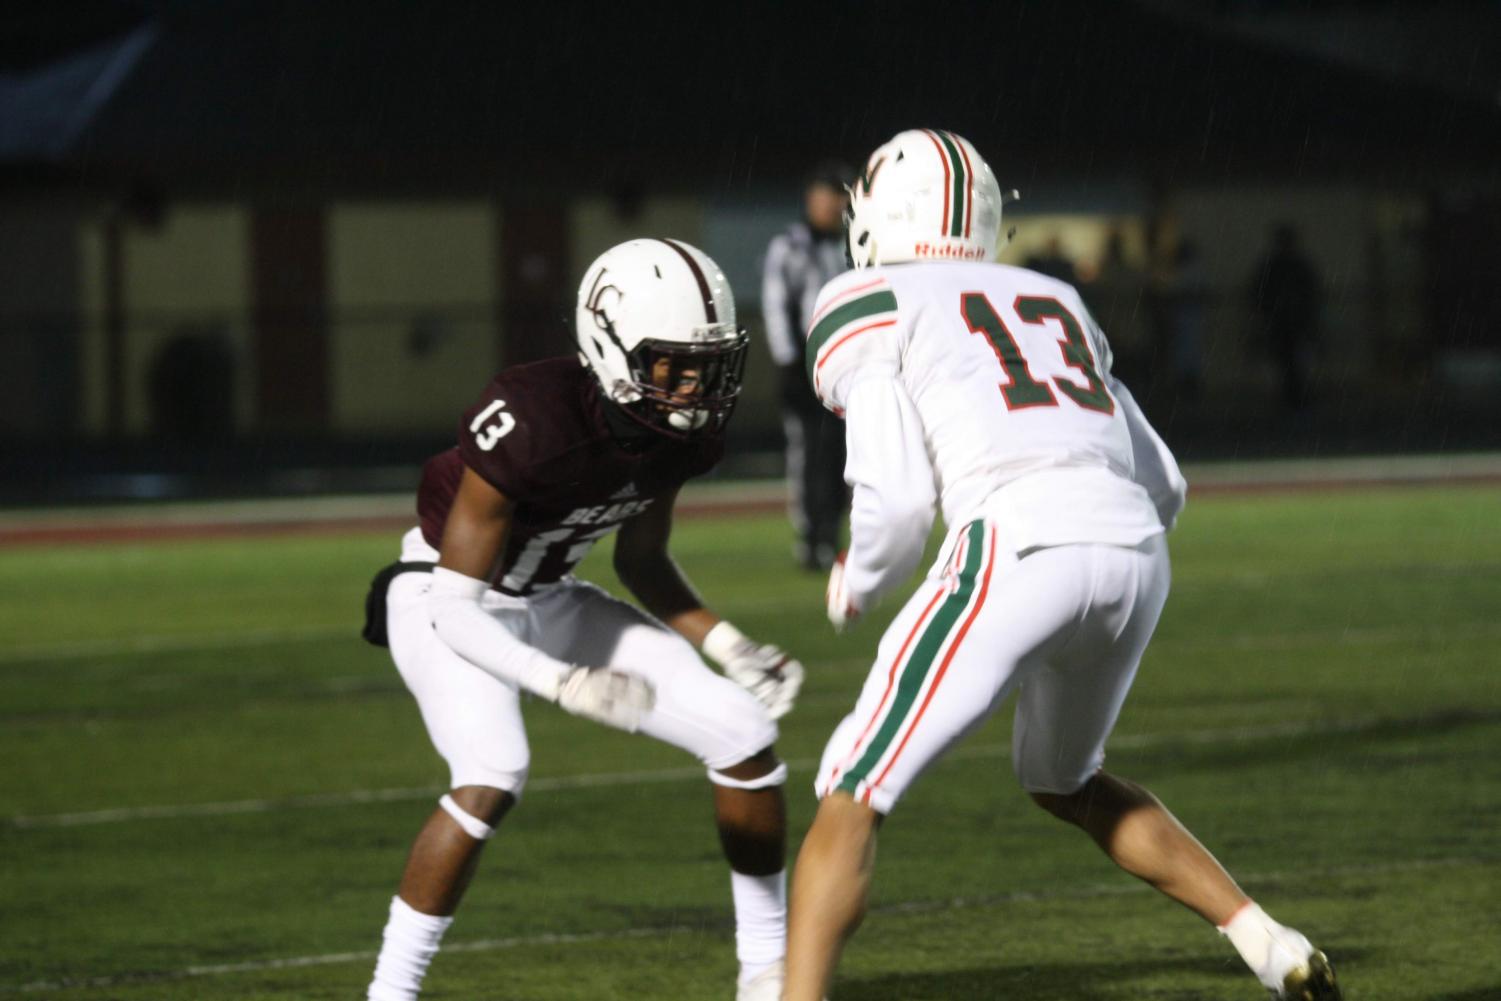 Lawrence North vs. Lawrence Central football Photo Gallery North Star